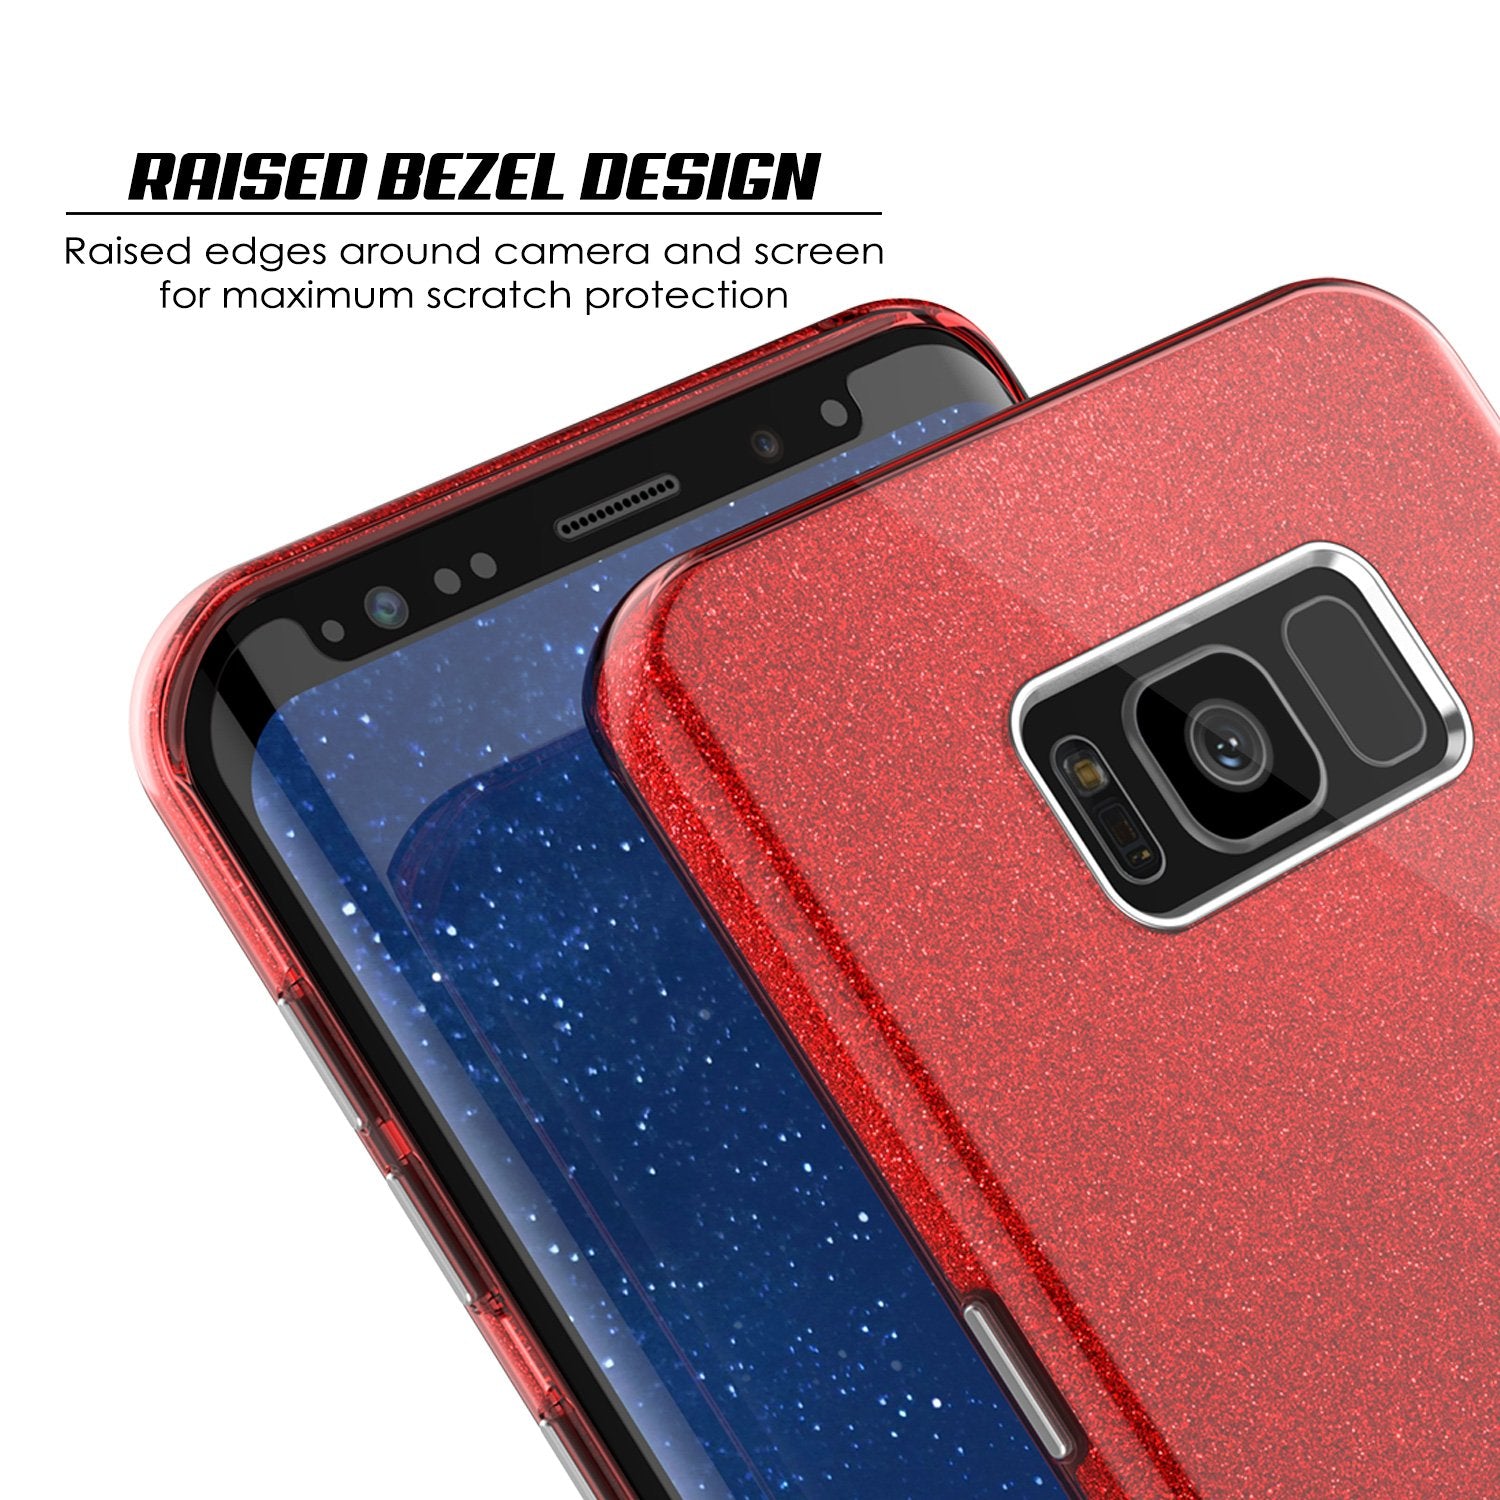 Galaxy S8 Case, Punkcase Galactic 2.0 Series Ultra Slim Protective Armor TPU Cover w/ PunkShield Screen Protector [Red]